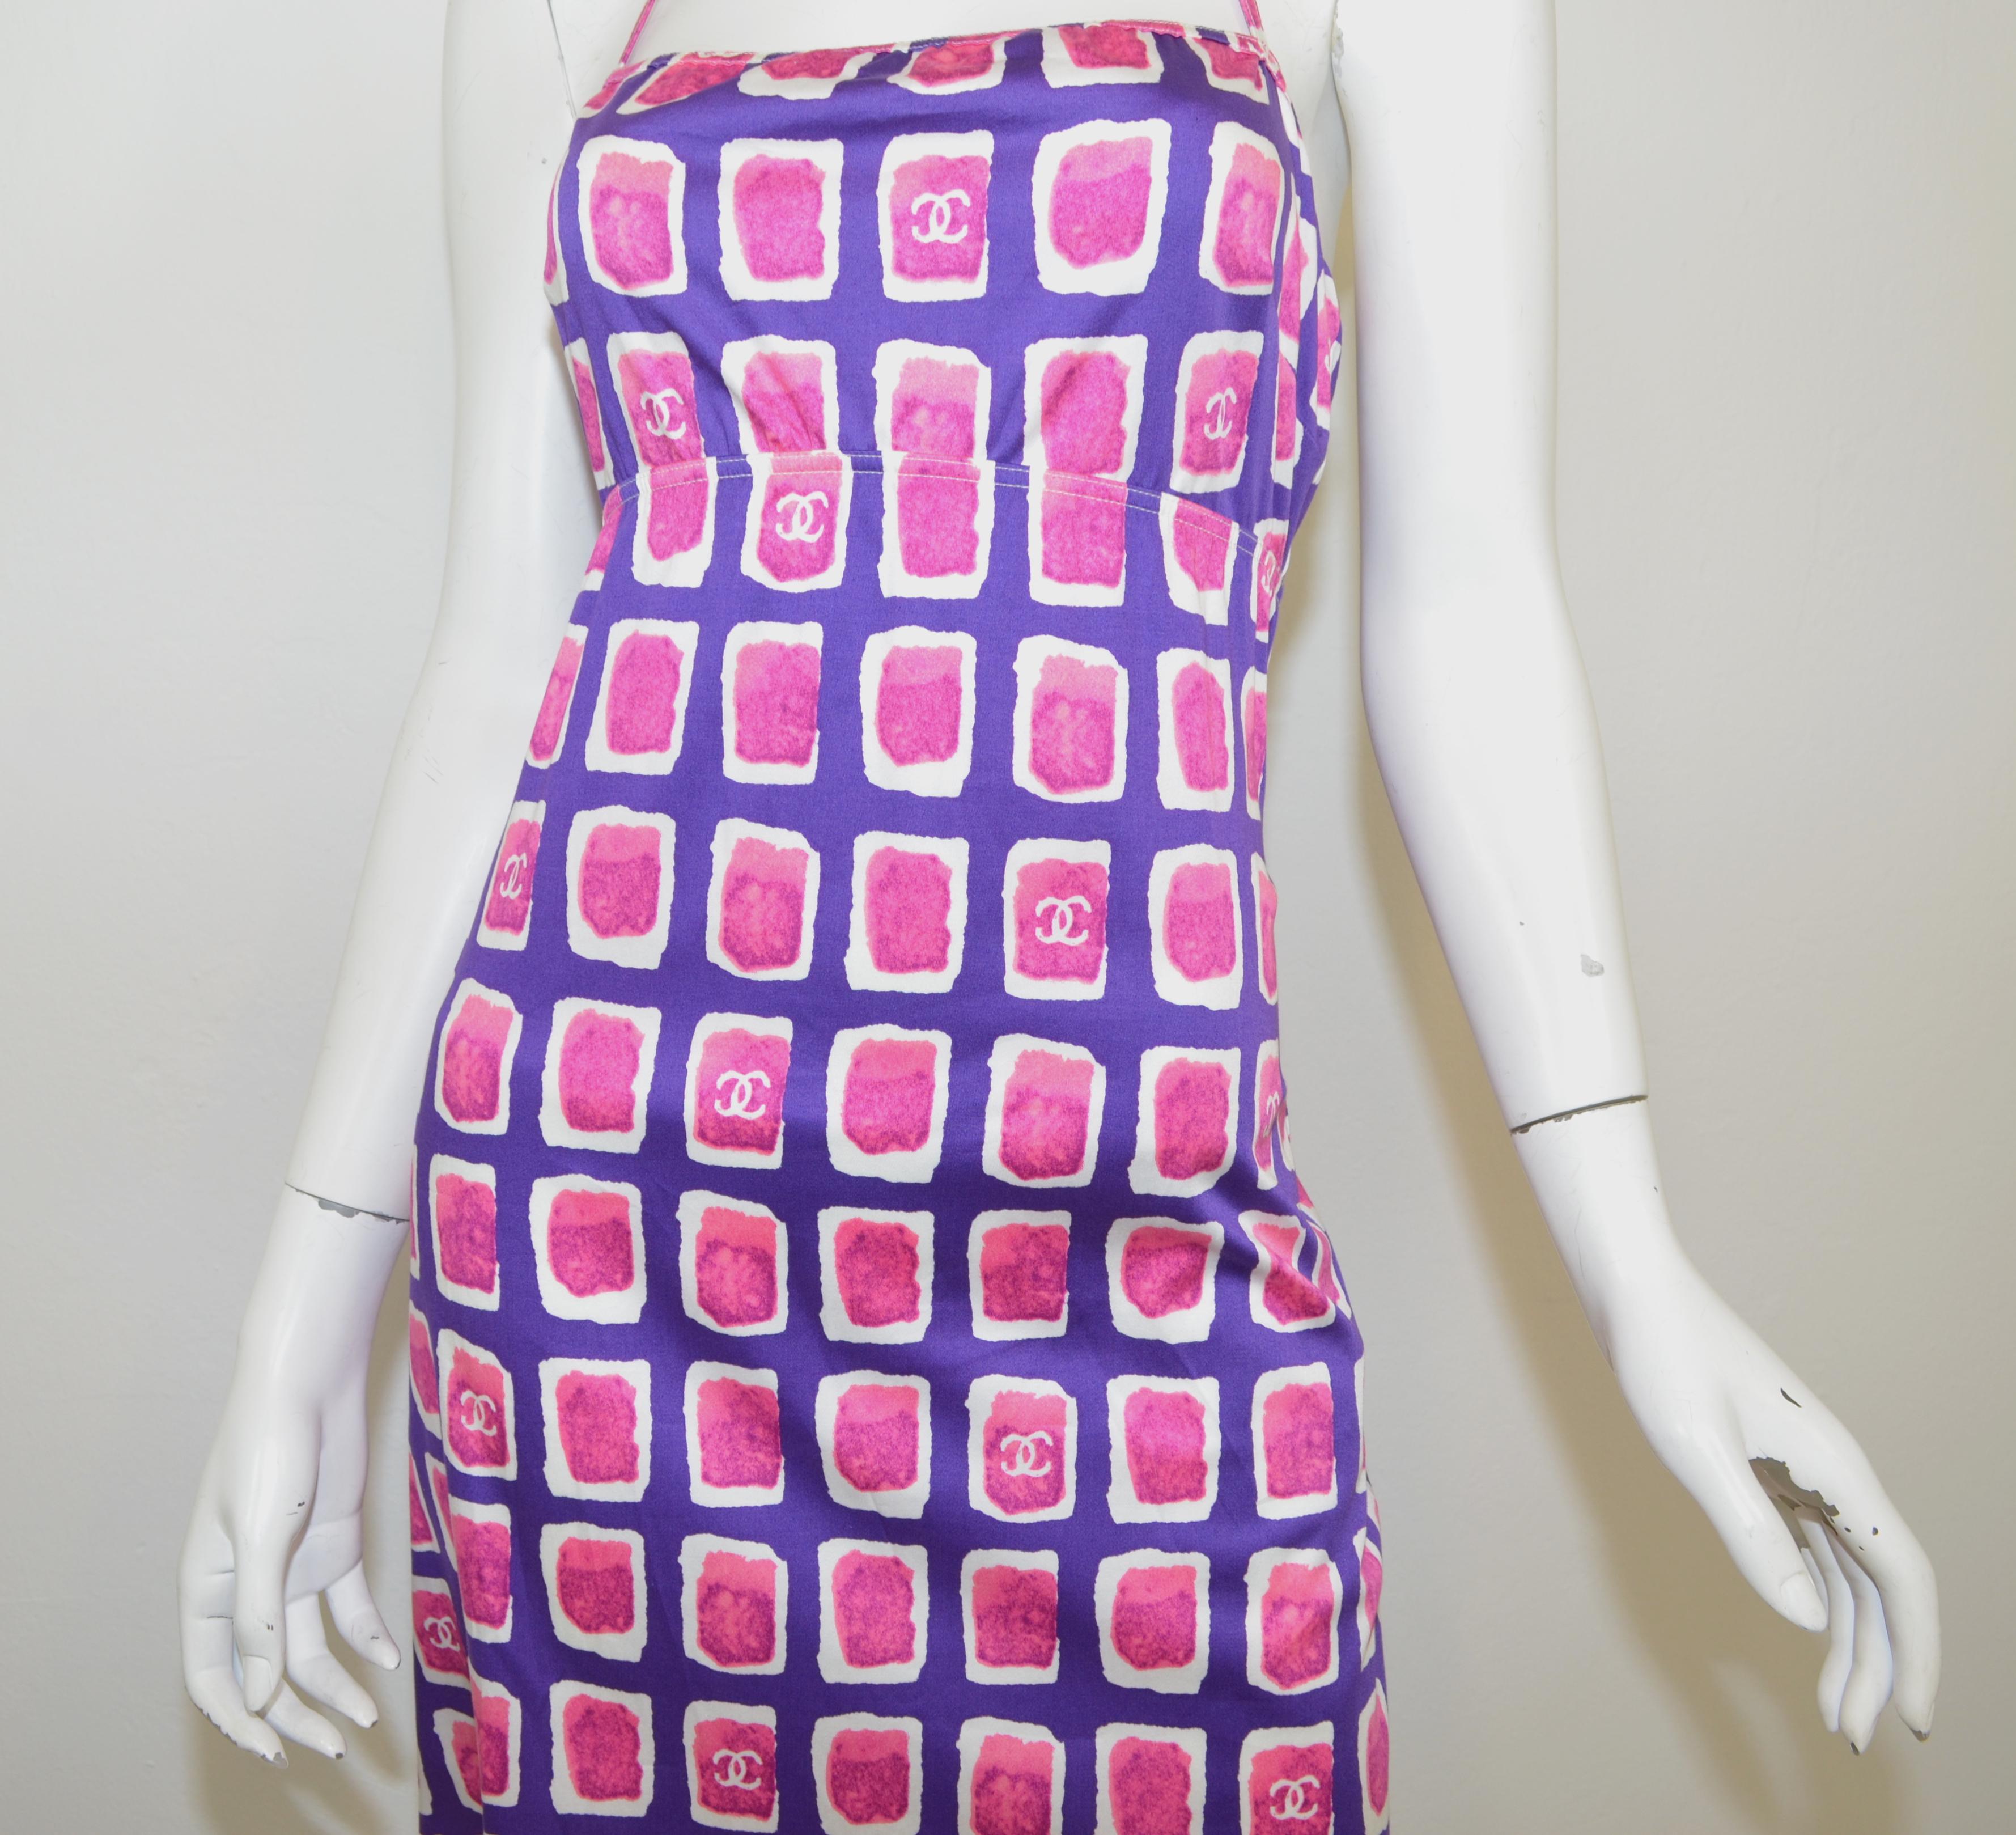 Chanel cotton blend halter dress, from 2001P, Bright purple, pink and white print with Chanel's  CC logo throughout the print. Dress has a back zipper fastening. Fabric Content is Cotton: 70%, Rayon: 26%, Spandex: 4%. Designer size 42. Made in